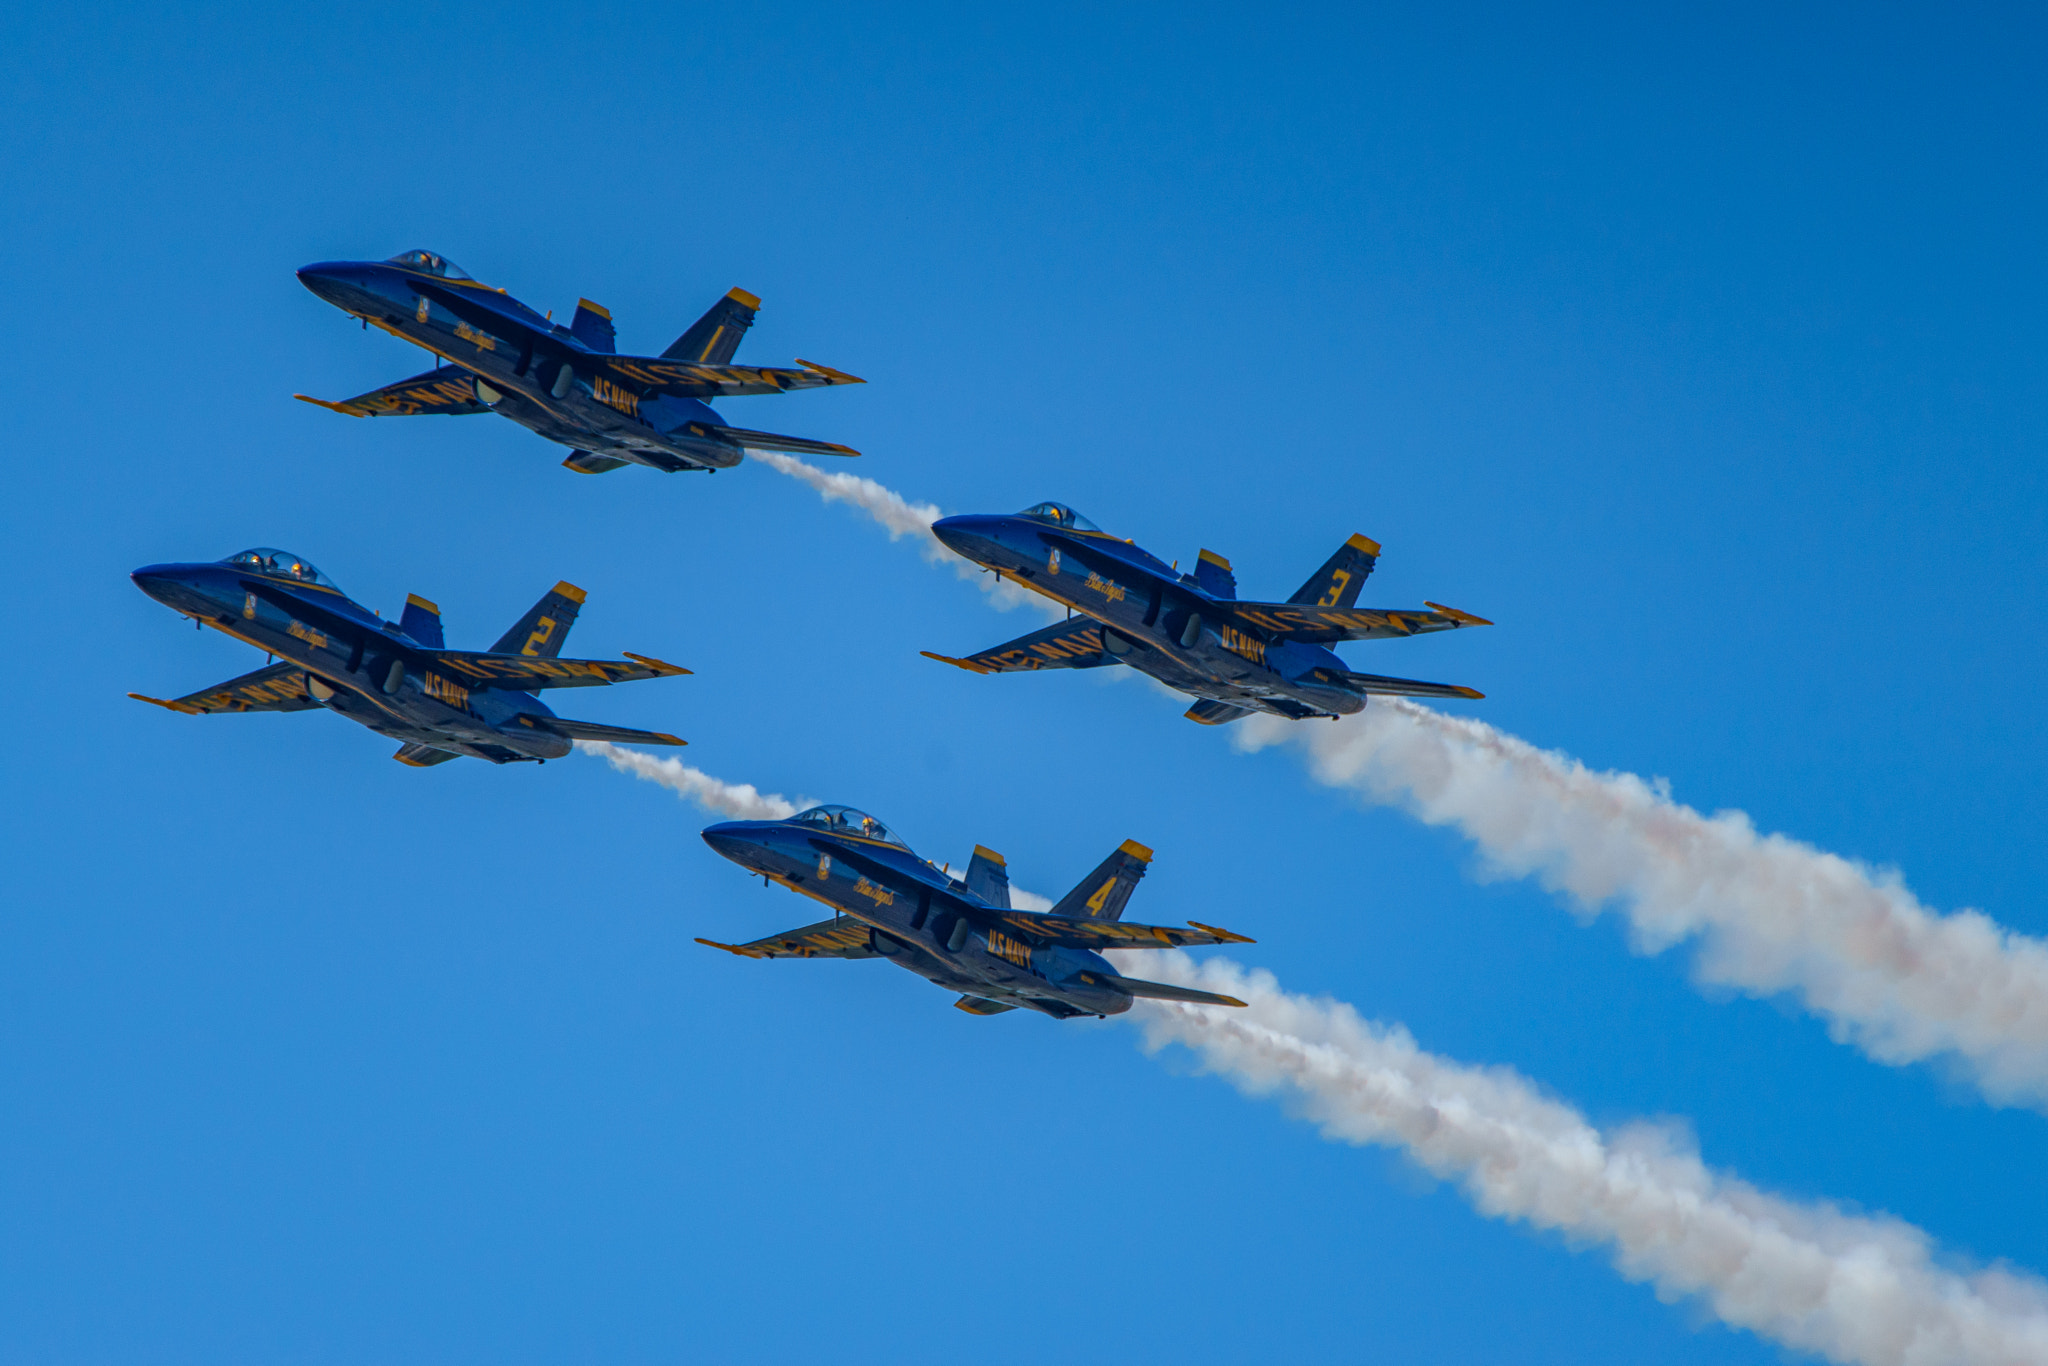 Sony a7 II + Tamron SP 150-600mm F5-6.3 Di VC USD sample photo. Blue angels formation photography